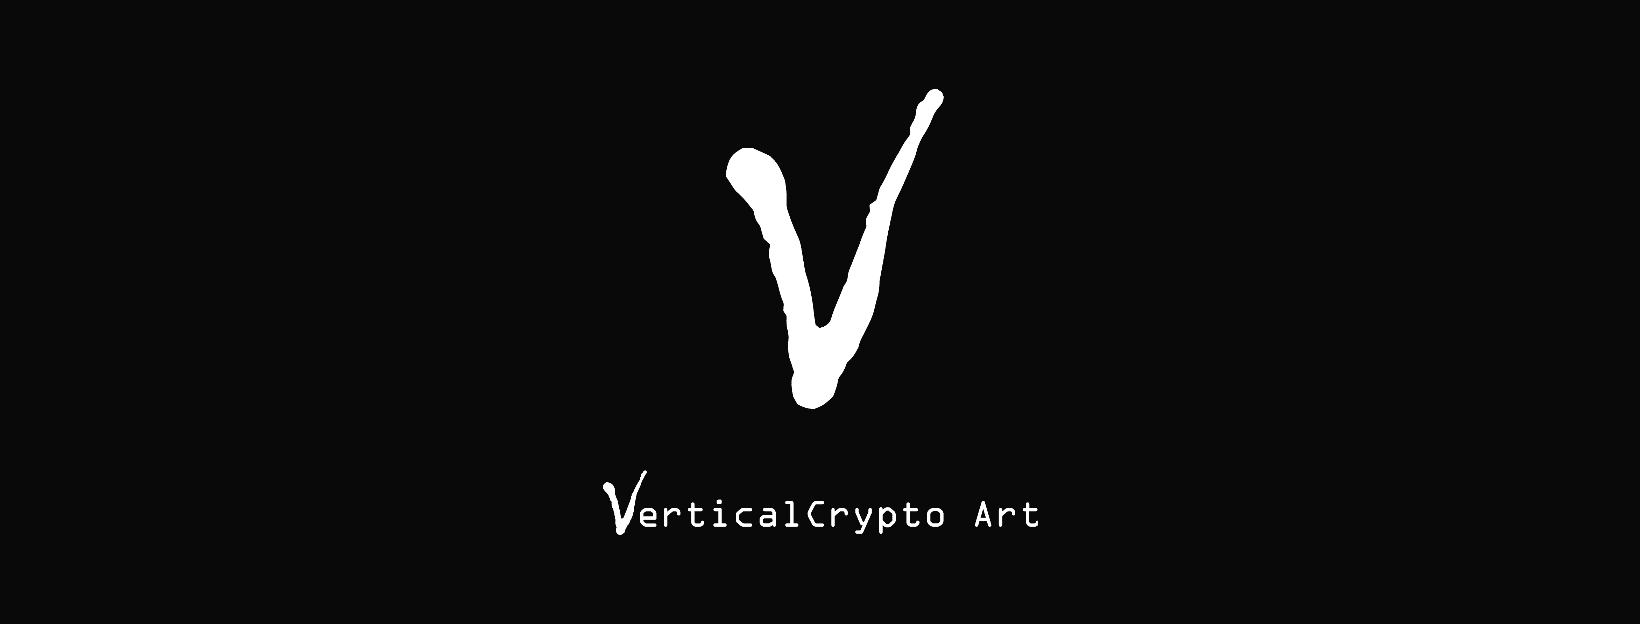 VerticalCrypto Art presents: PROOF OF PEOPLE – London’s first NFT Festival powered by Tezos 